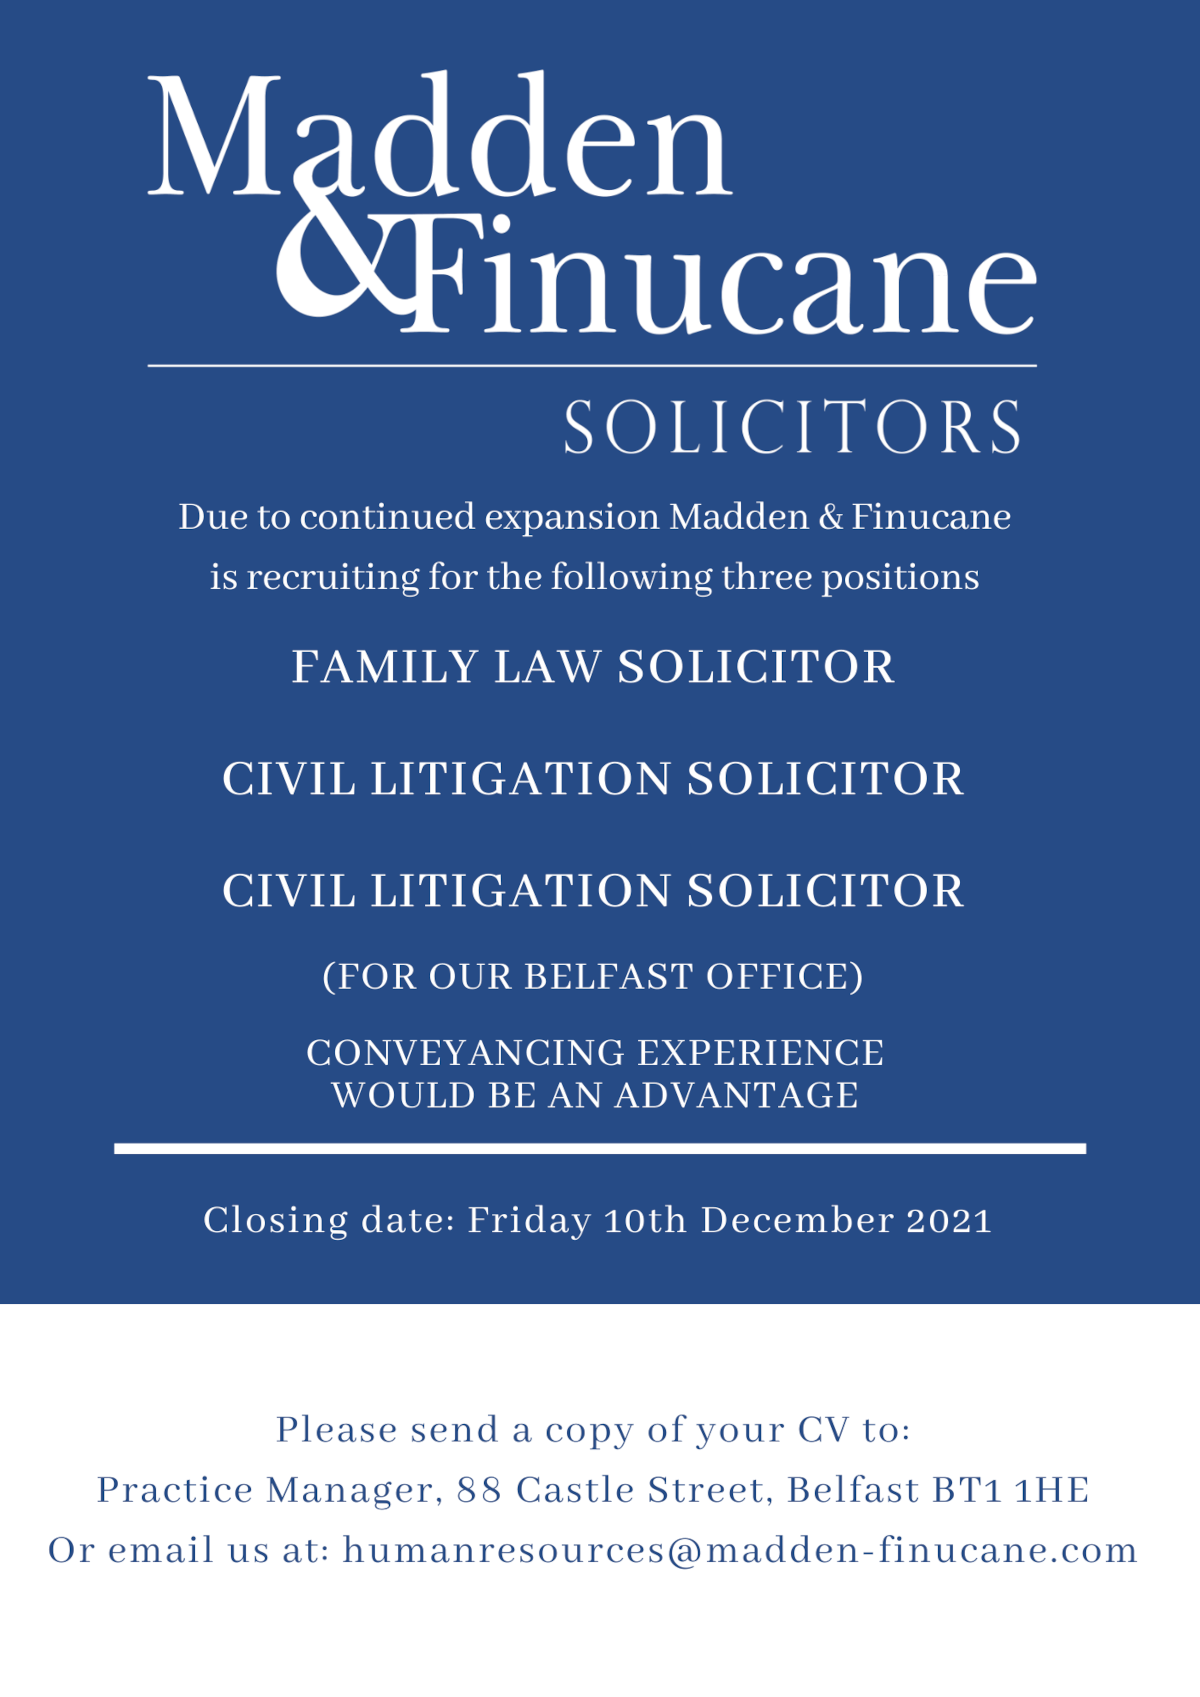 Solicitor Job Opportunities at Madden & Finucane